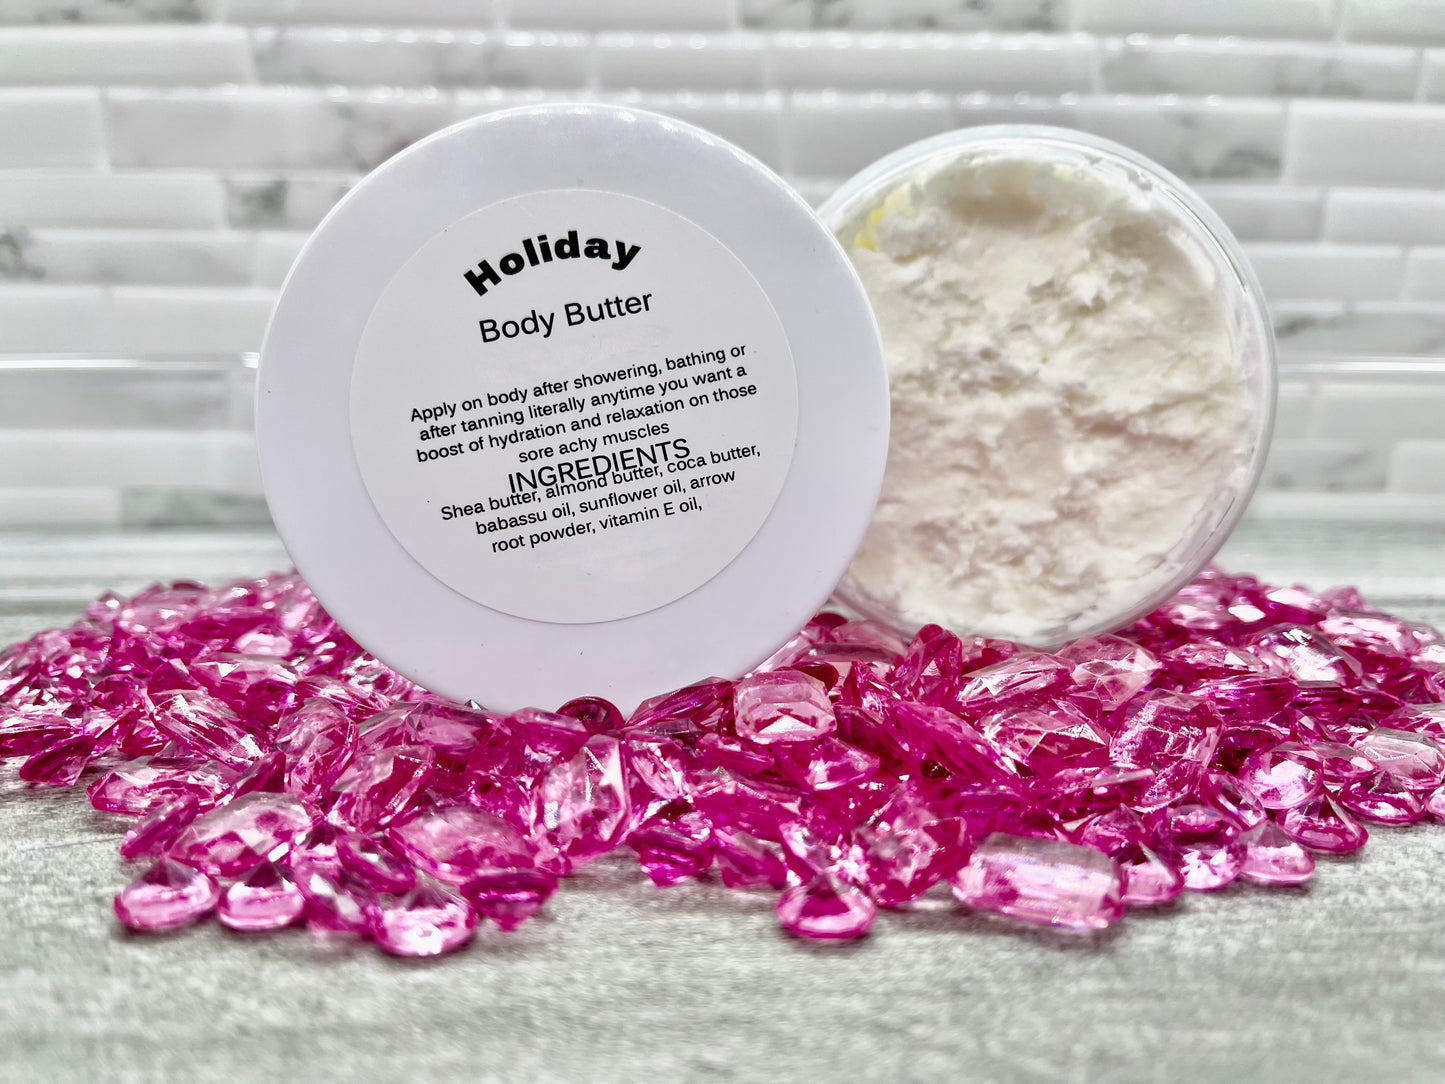 Botanical Organic Whipped Body Butters